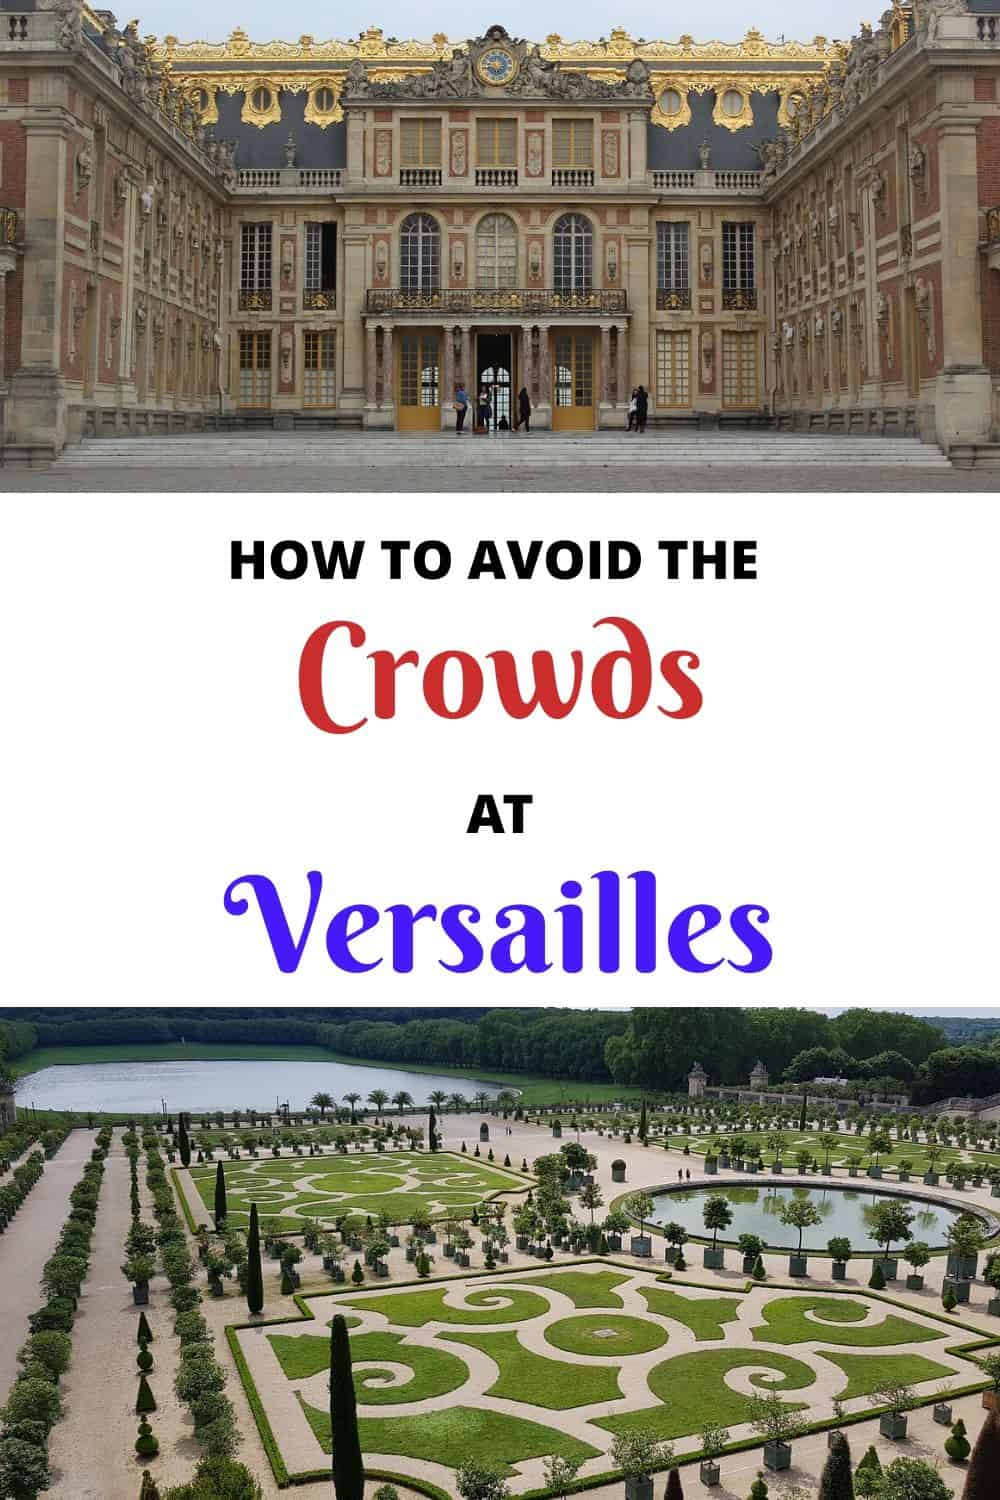 How to Avoid the Crowds at Versailles